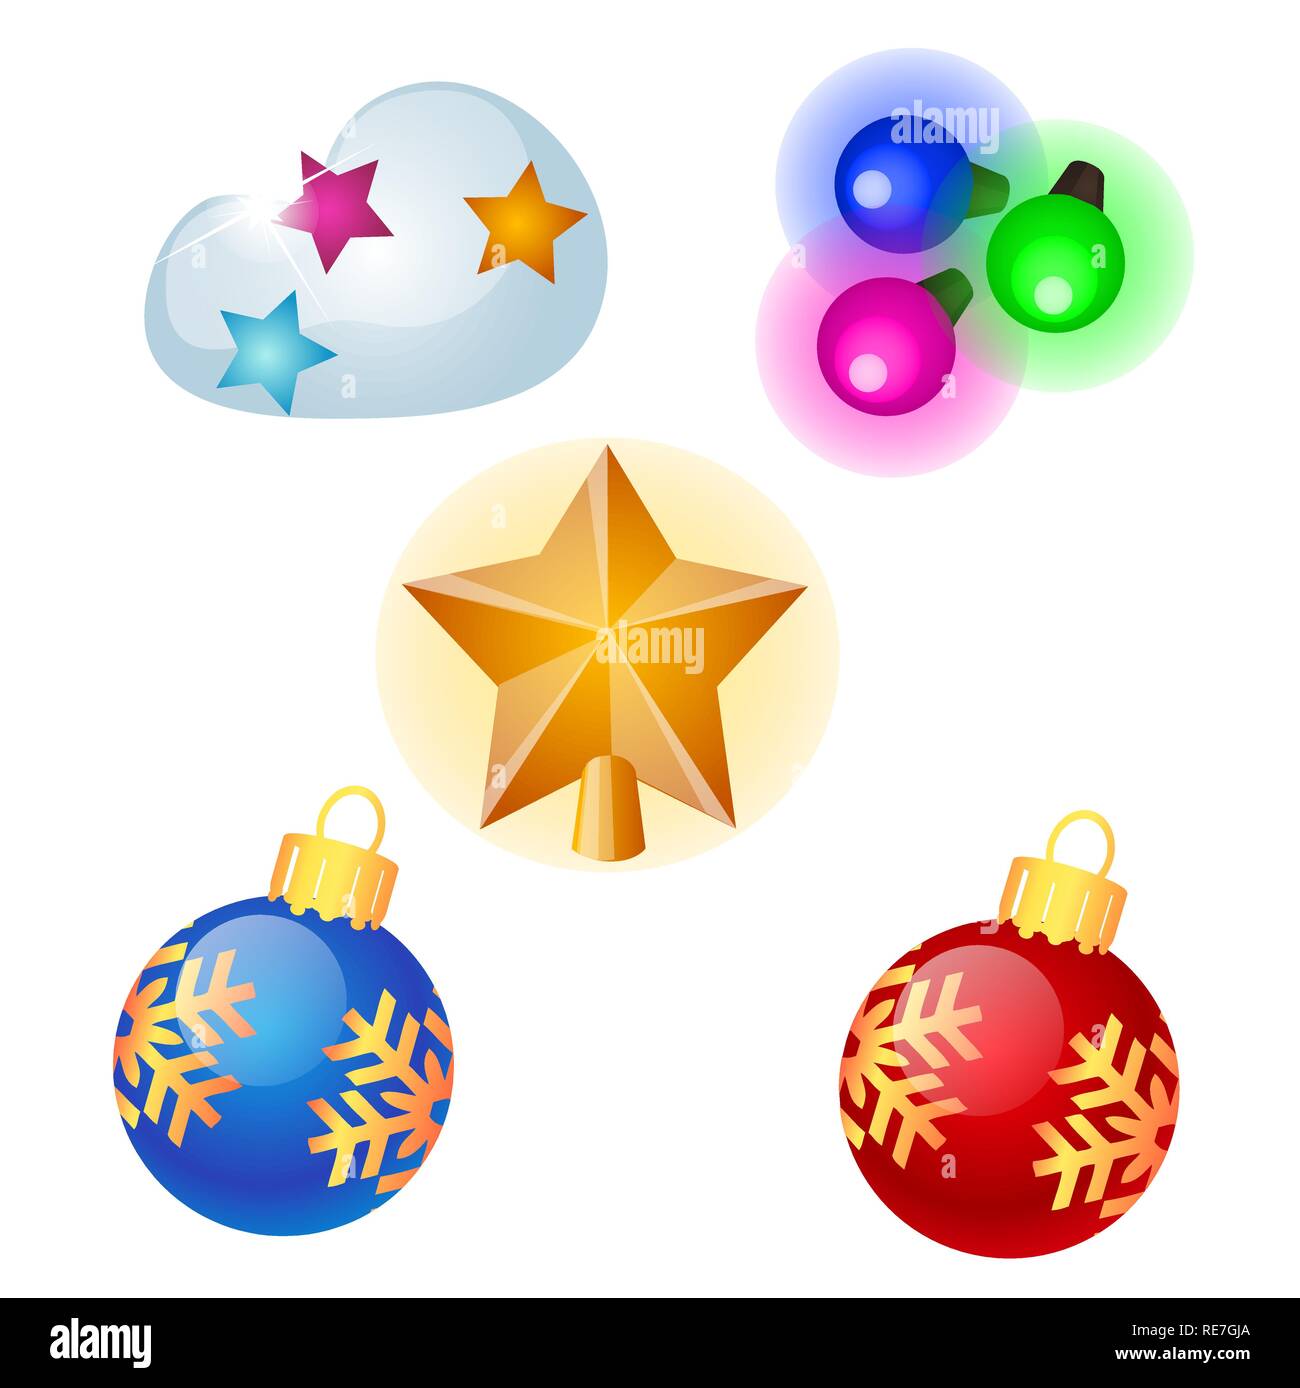 Sketch with Christmas tree decorations different forms isolated on white background. Colorful festive glass baubles. Template of poster, invitation, other card. Vector cartoon close-up illustration. Stock Vector